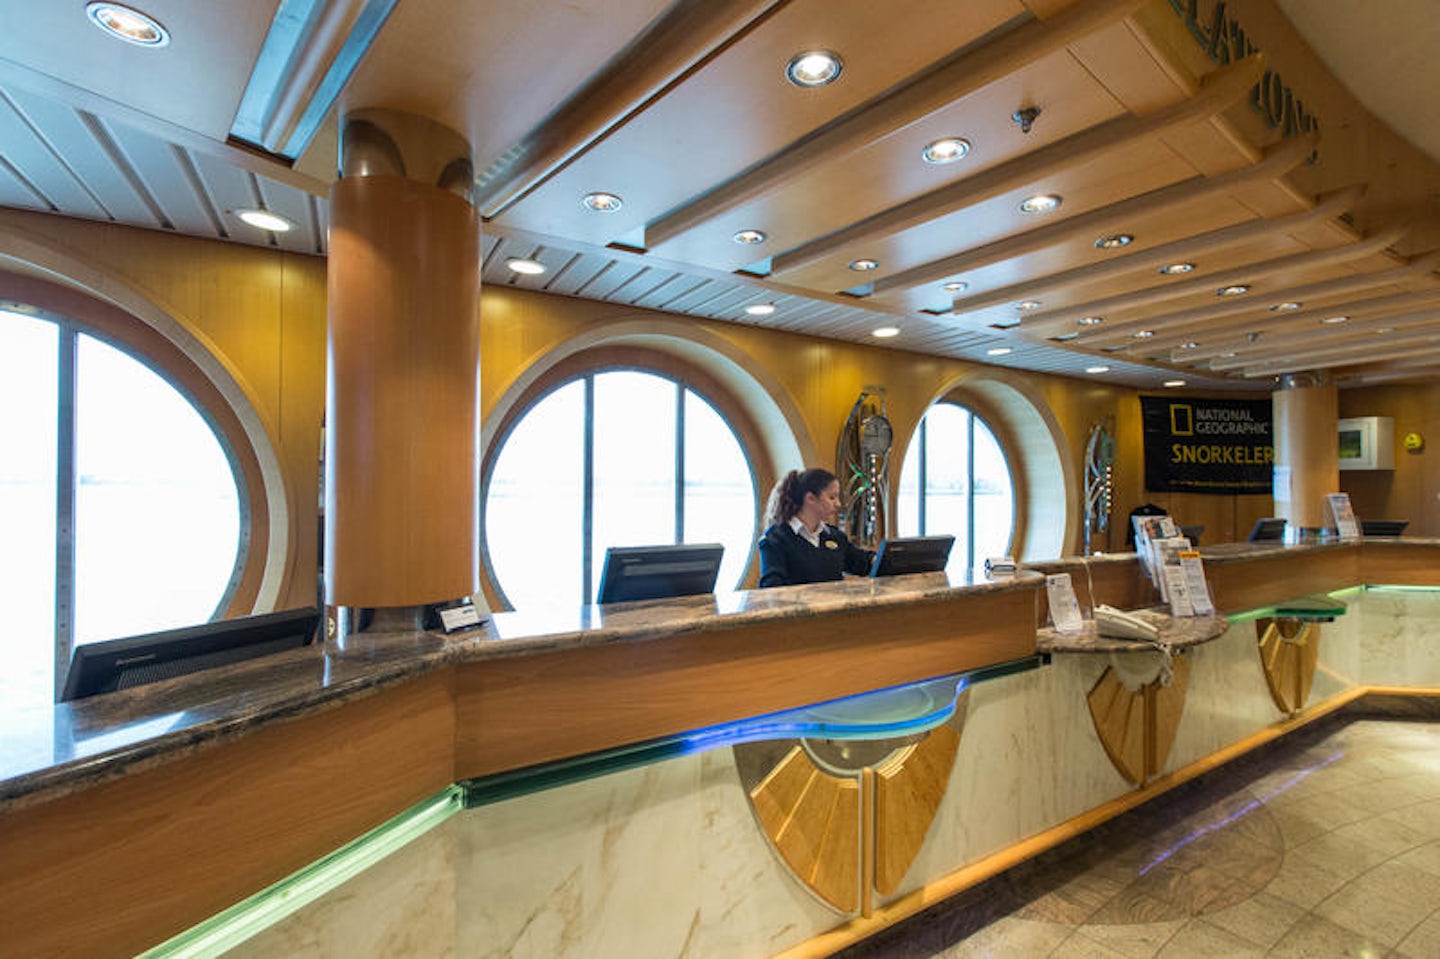 Guest Services on Radiance of the Seas